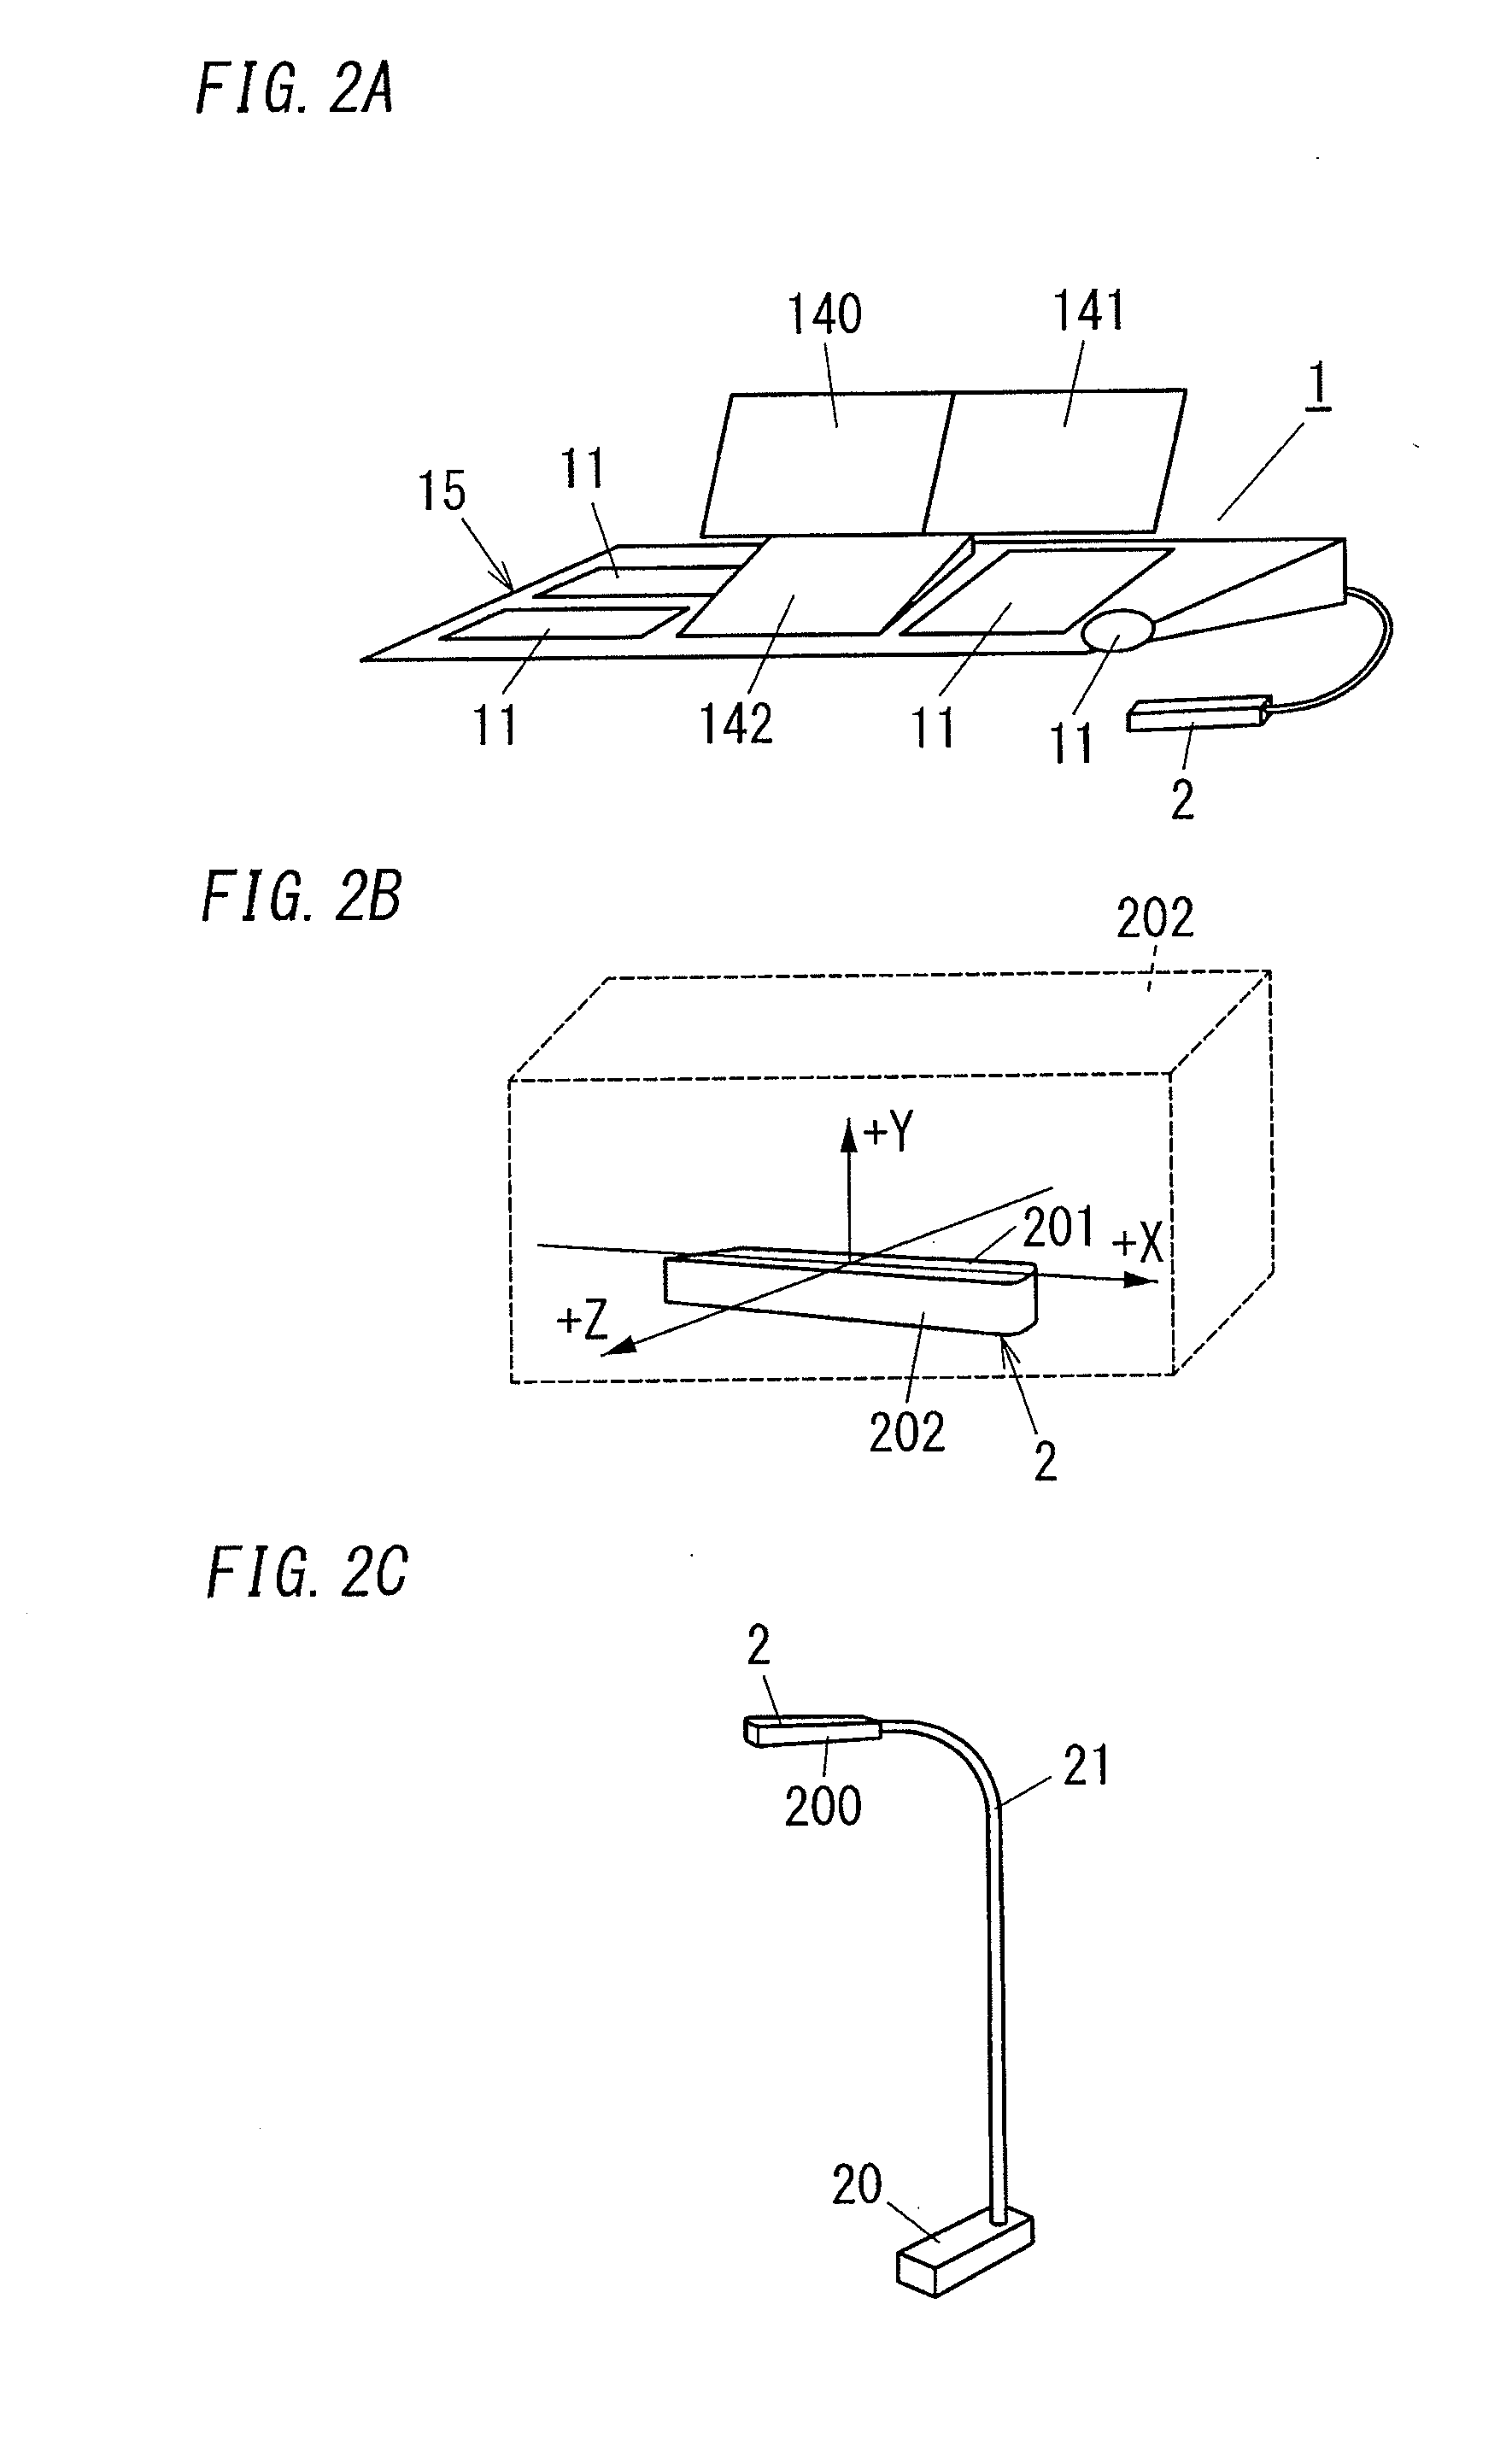 Lighting control console and lighting control system